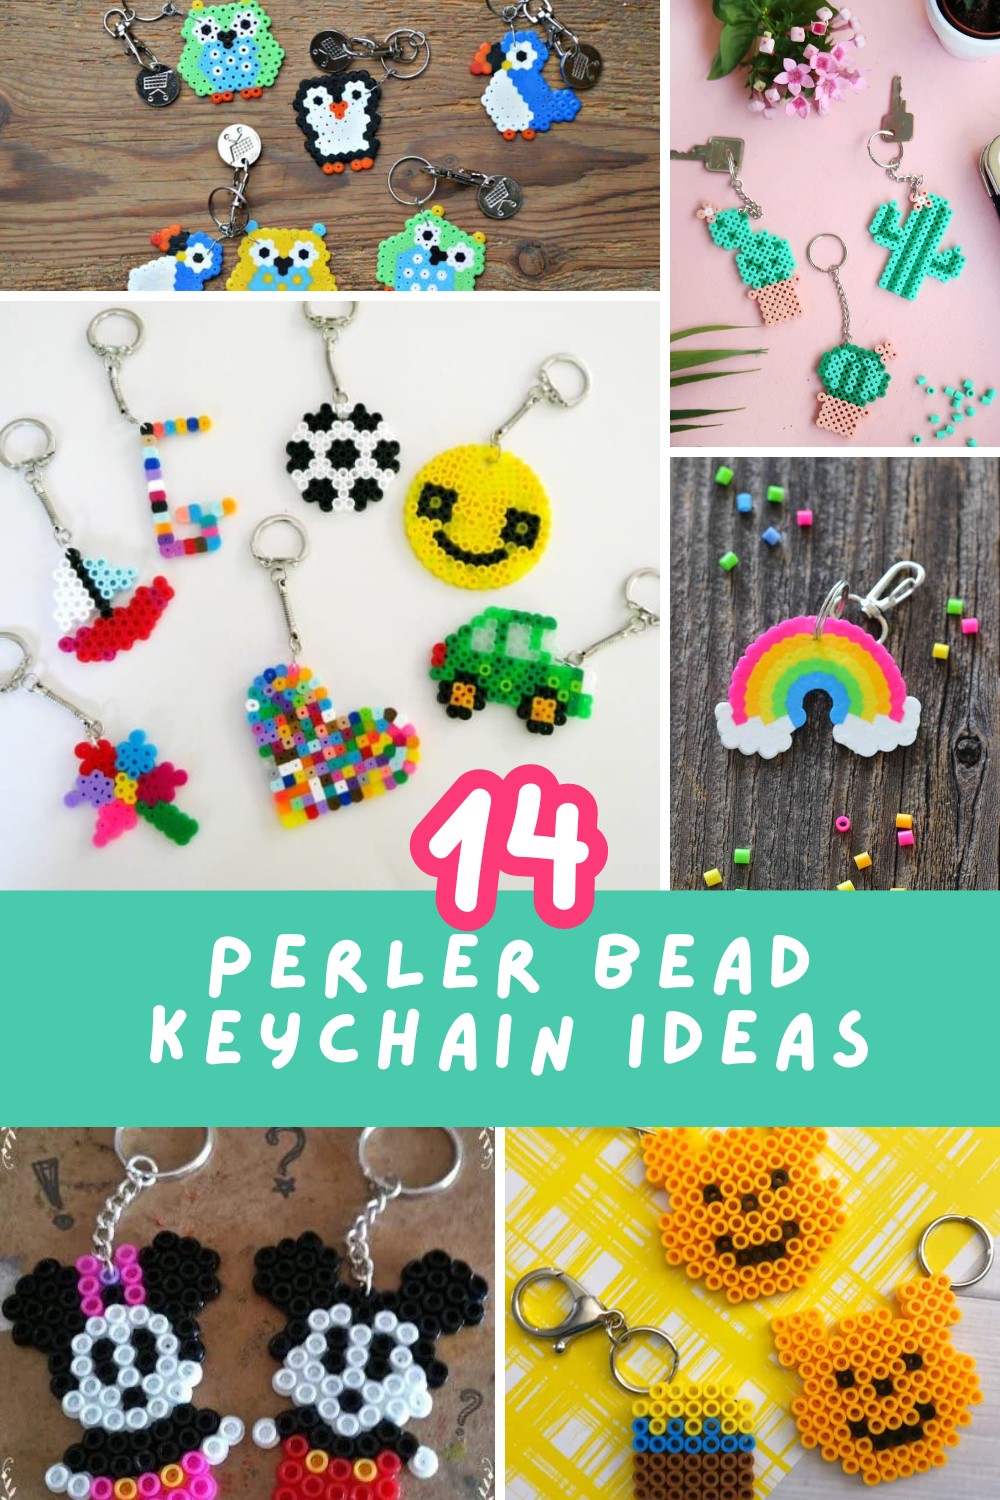 Craft your way to a stylish school year with these DIY Perler bead keychains! 🎨✨ Perfect for personalizing your gear or gifting to friends. Get creative and make each keychain a unique masterpiece. #DIYCrafts #SchoolSupplies #PerlerBeadProjects







